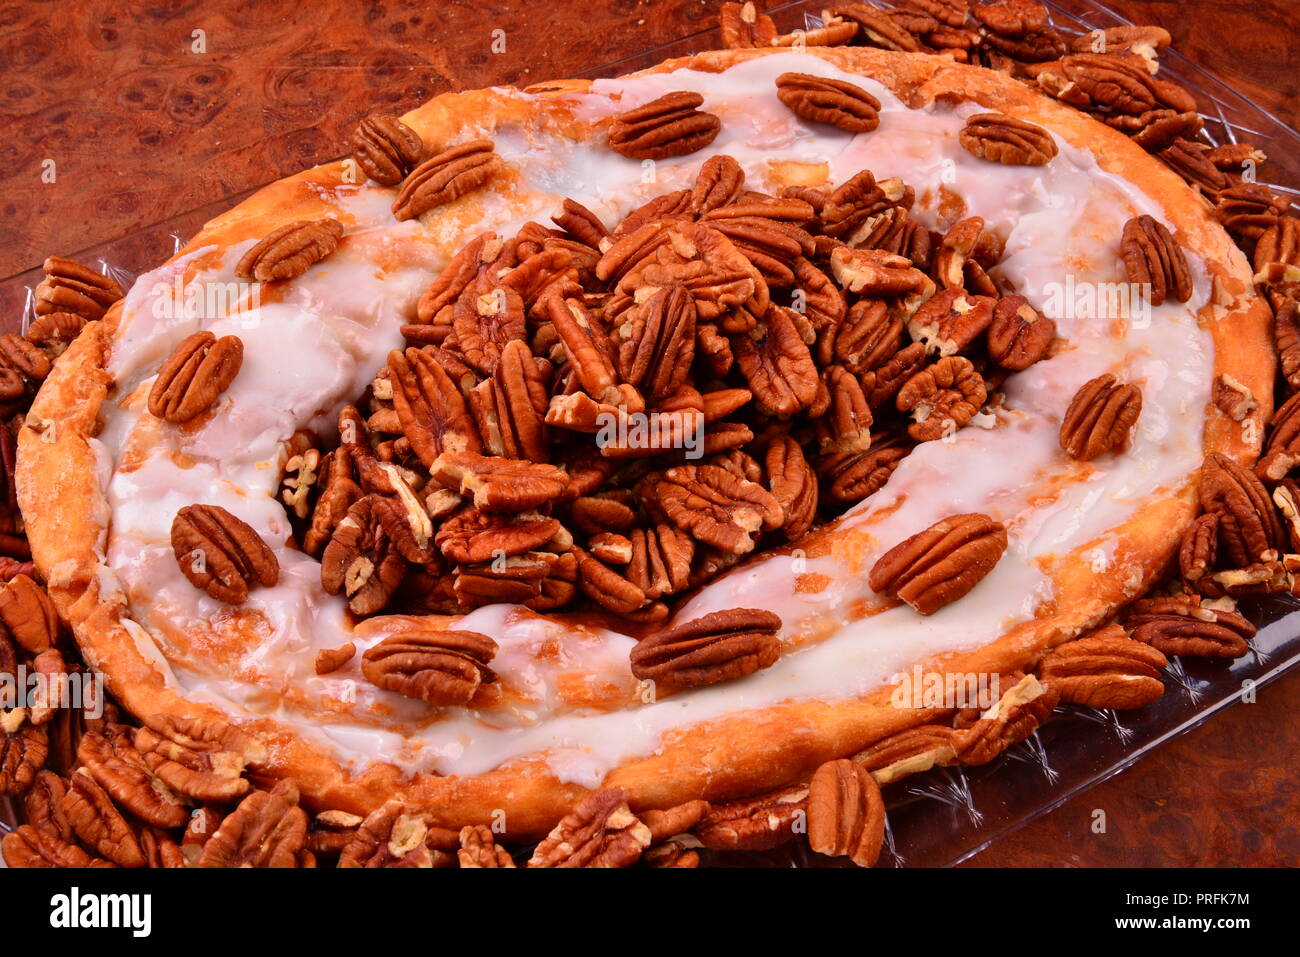 The sweet pastry treat pecan Kringle from Racine Wisconsin is a local favorite surrounded by pecans. Stock Photo